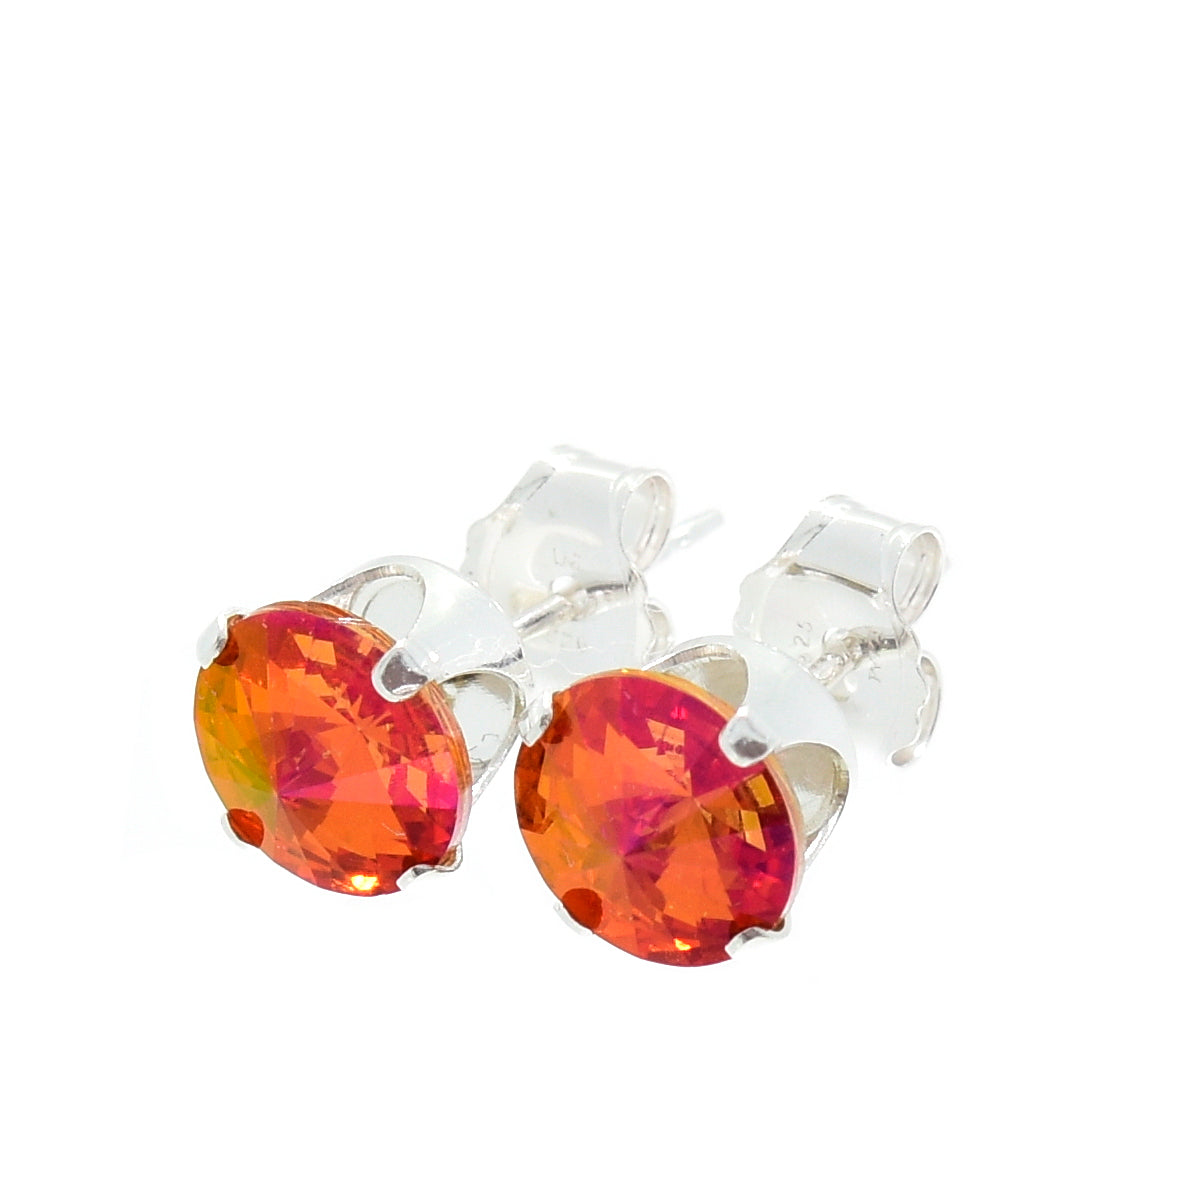 pewterhooter® Women's Classic Collection 925 Sterling silver earrings with brilliant Astral Pink crystals, packaged in a gift box for any occasion.